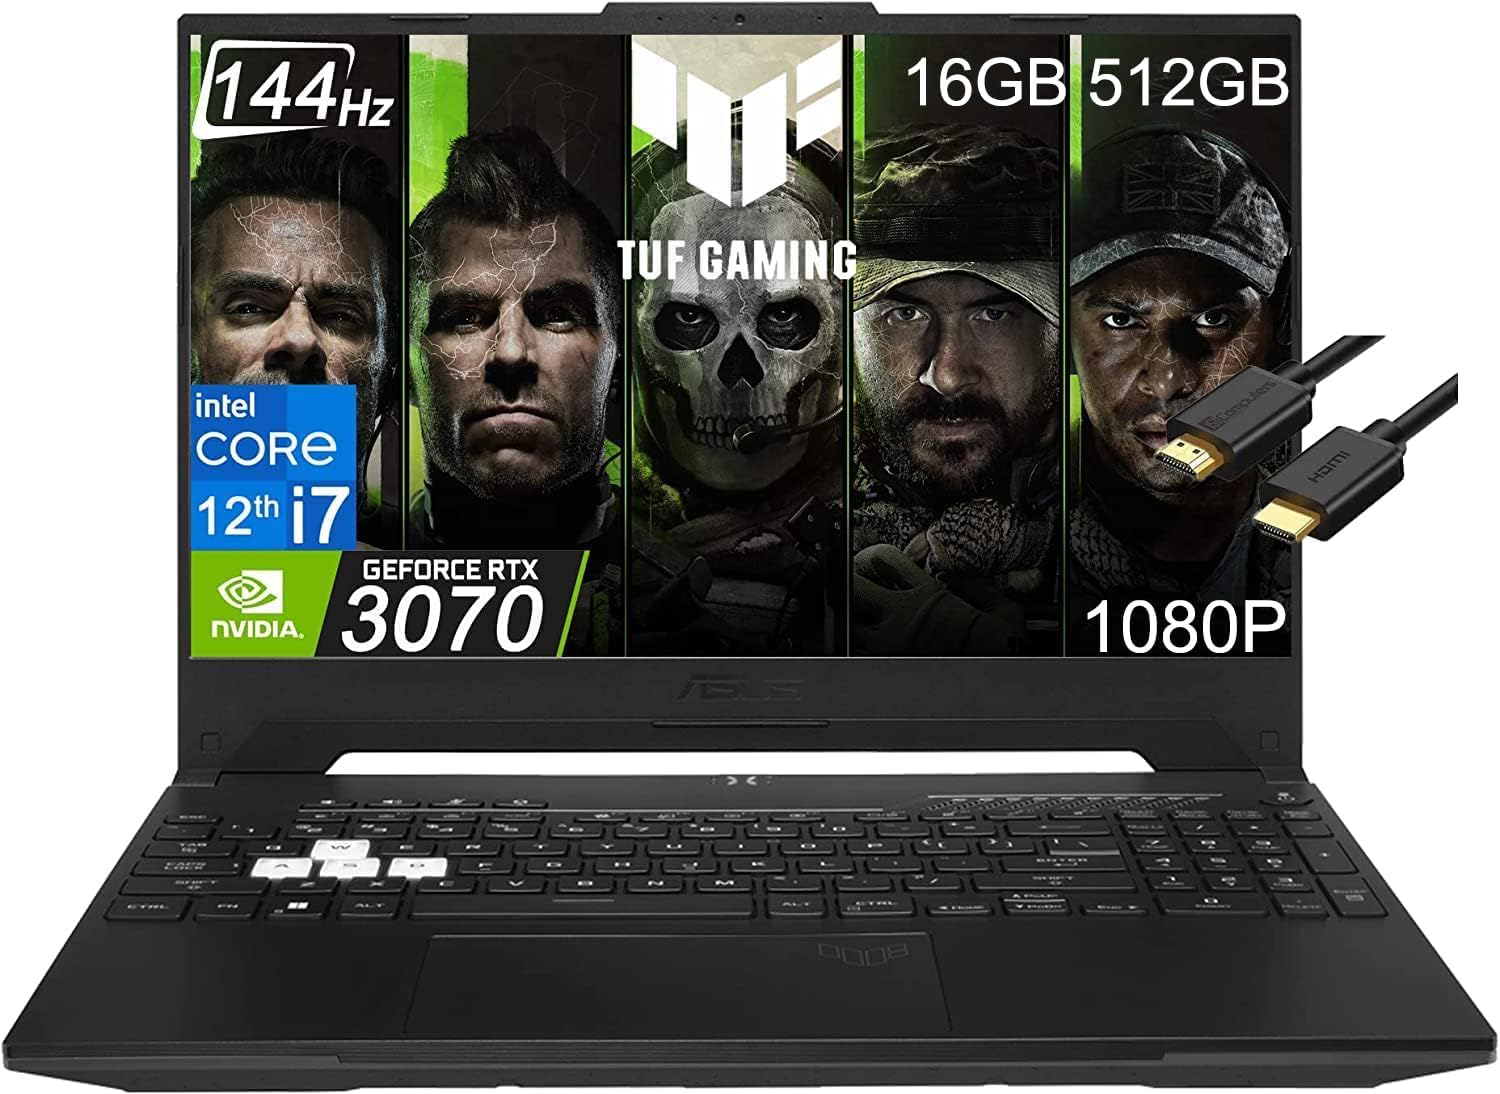 ASUS TUF Dash F15 Gaming Laptop (15.6 inches 144Hz, Intel 12th Gen i7-12650H, 16GB DDR5 RAM, 512GB PCle SSD, Geforce RTX 3070 8GB), Thunderbolt 4, Backlit KB, WiFi 6, IST Cable, Win 11 Home - Black 2